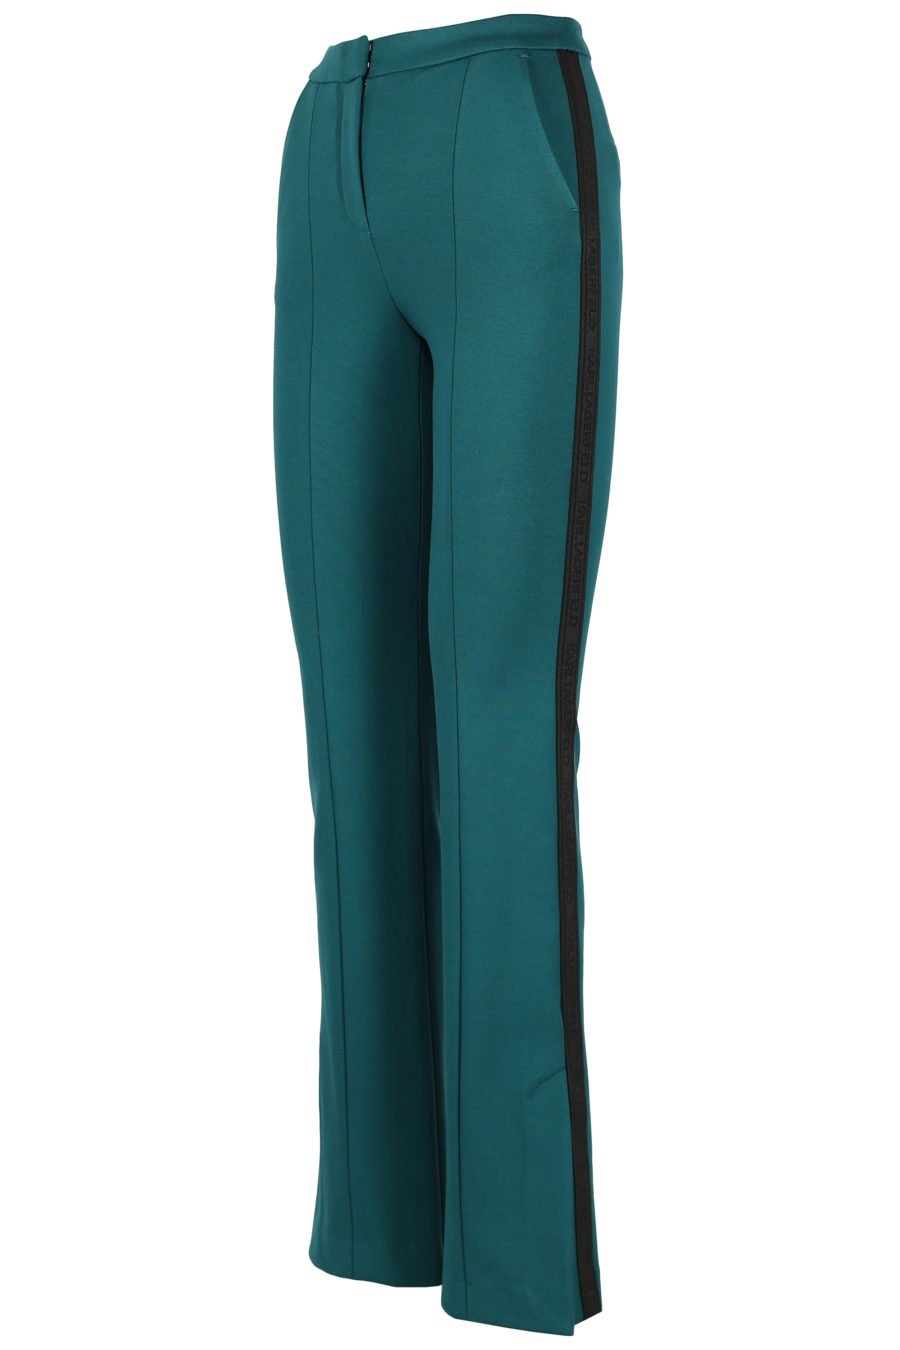 Green trousers with pockets - IMG 3214